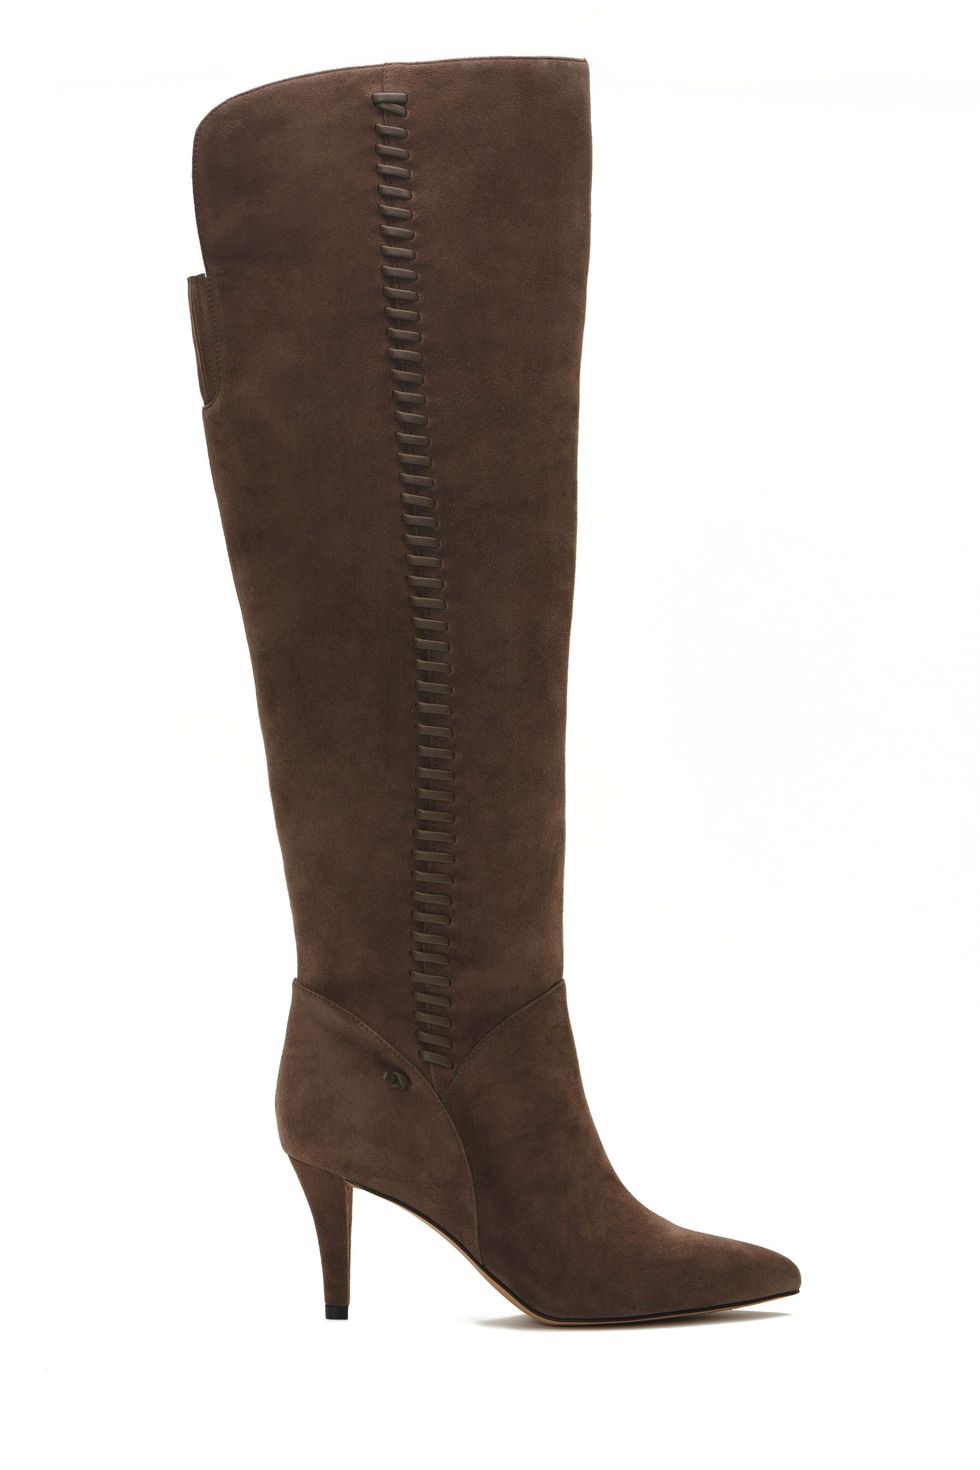 25 Best Suede Boots for Women 2022